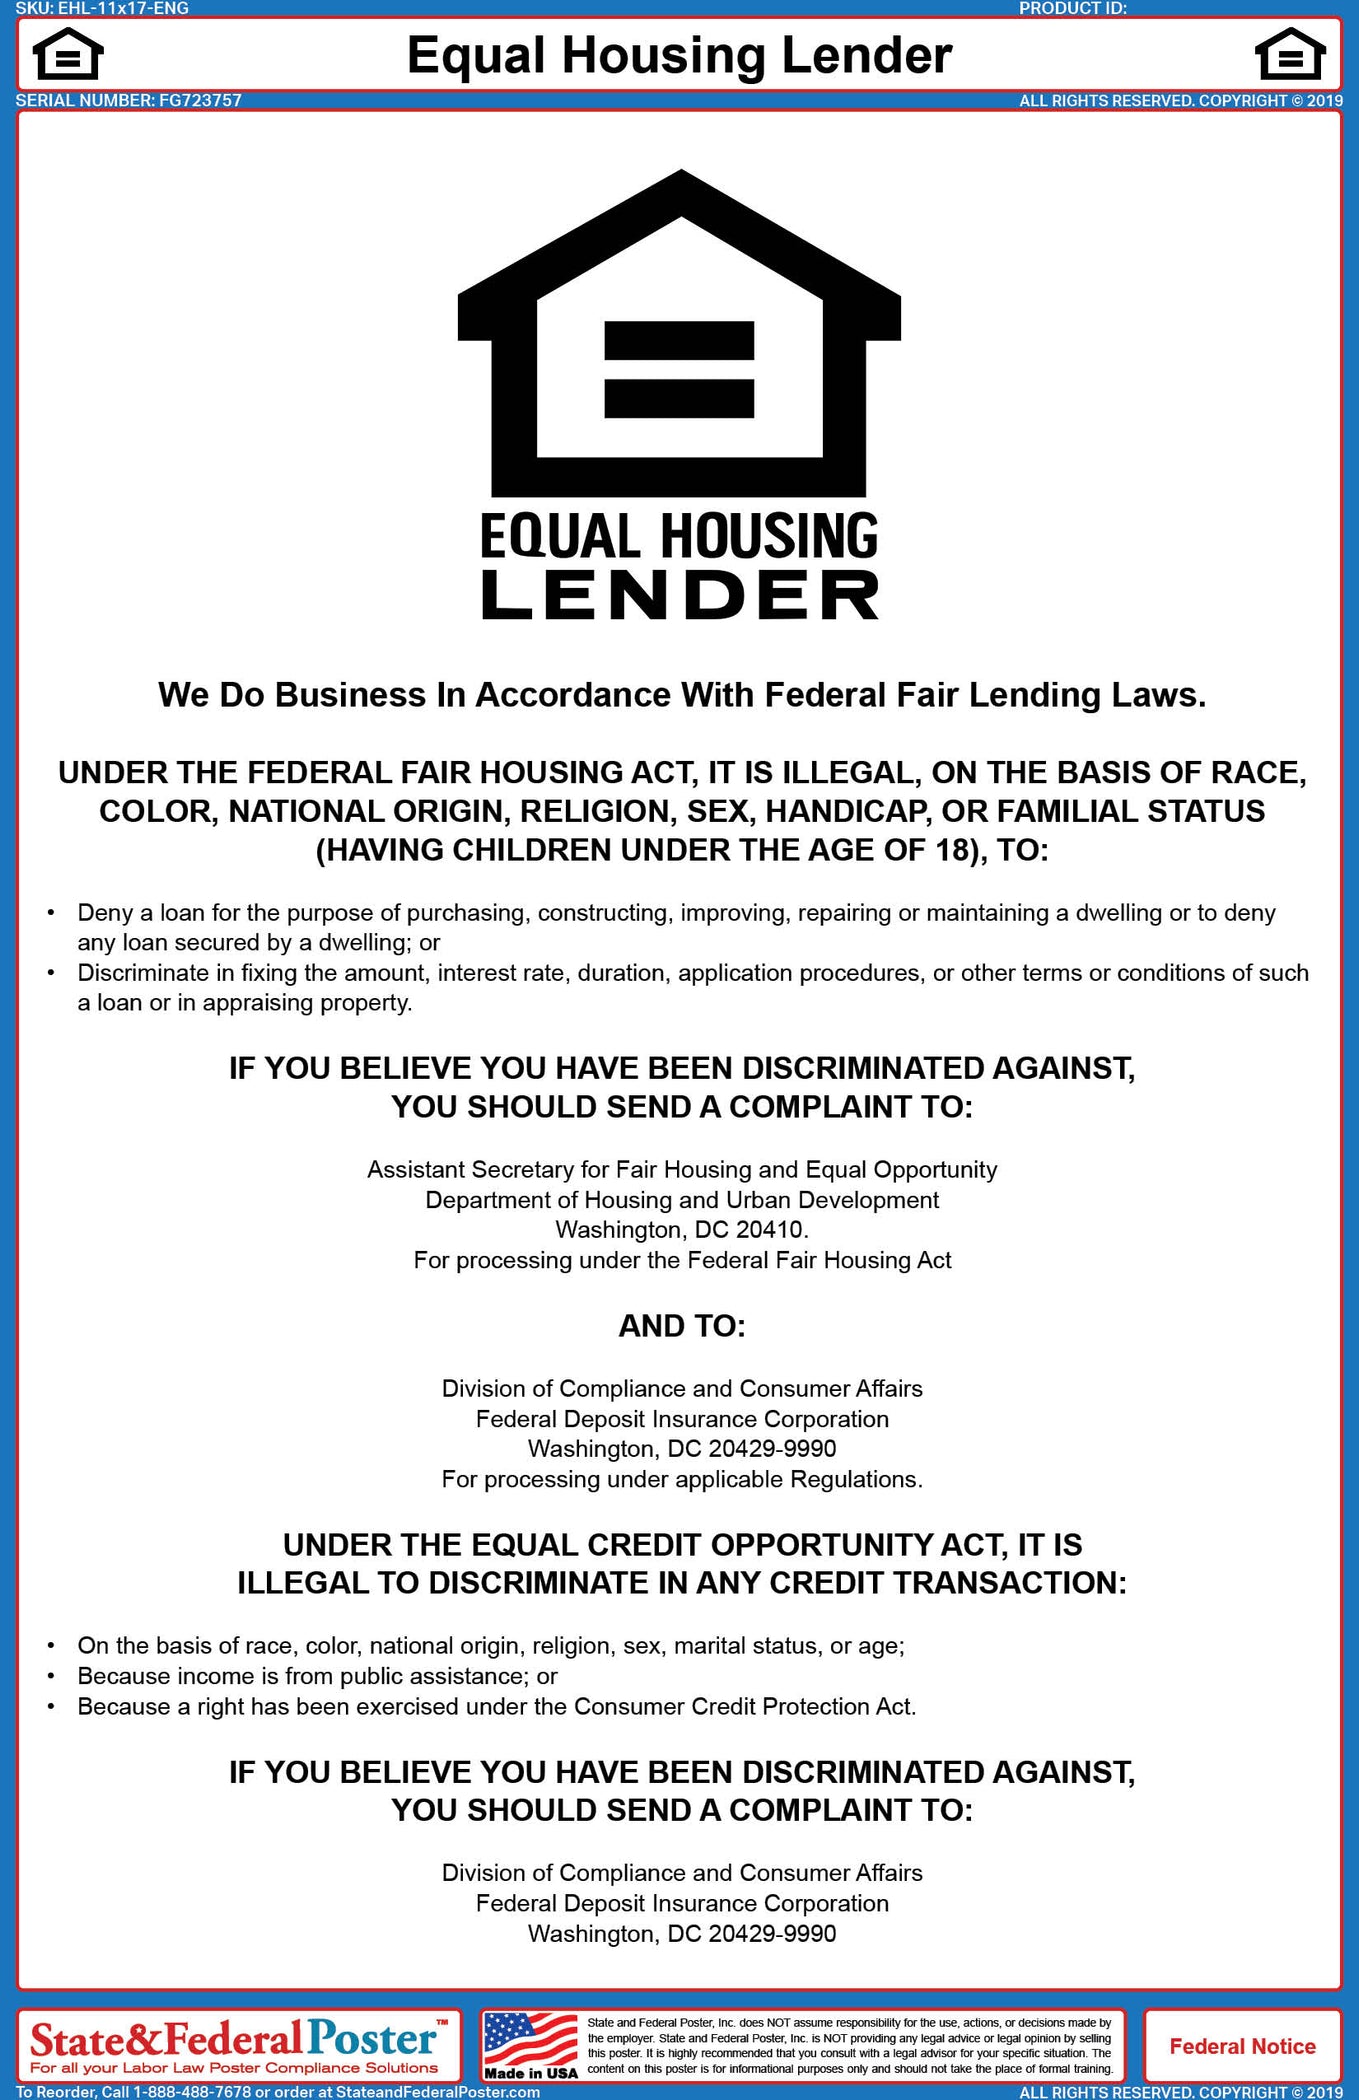 Equal Housing Lender Poster — State and Federal Poster